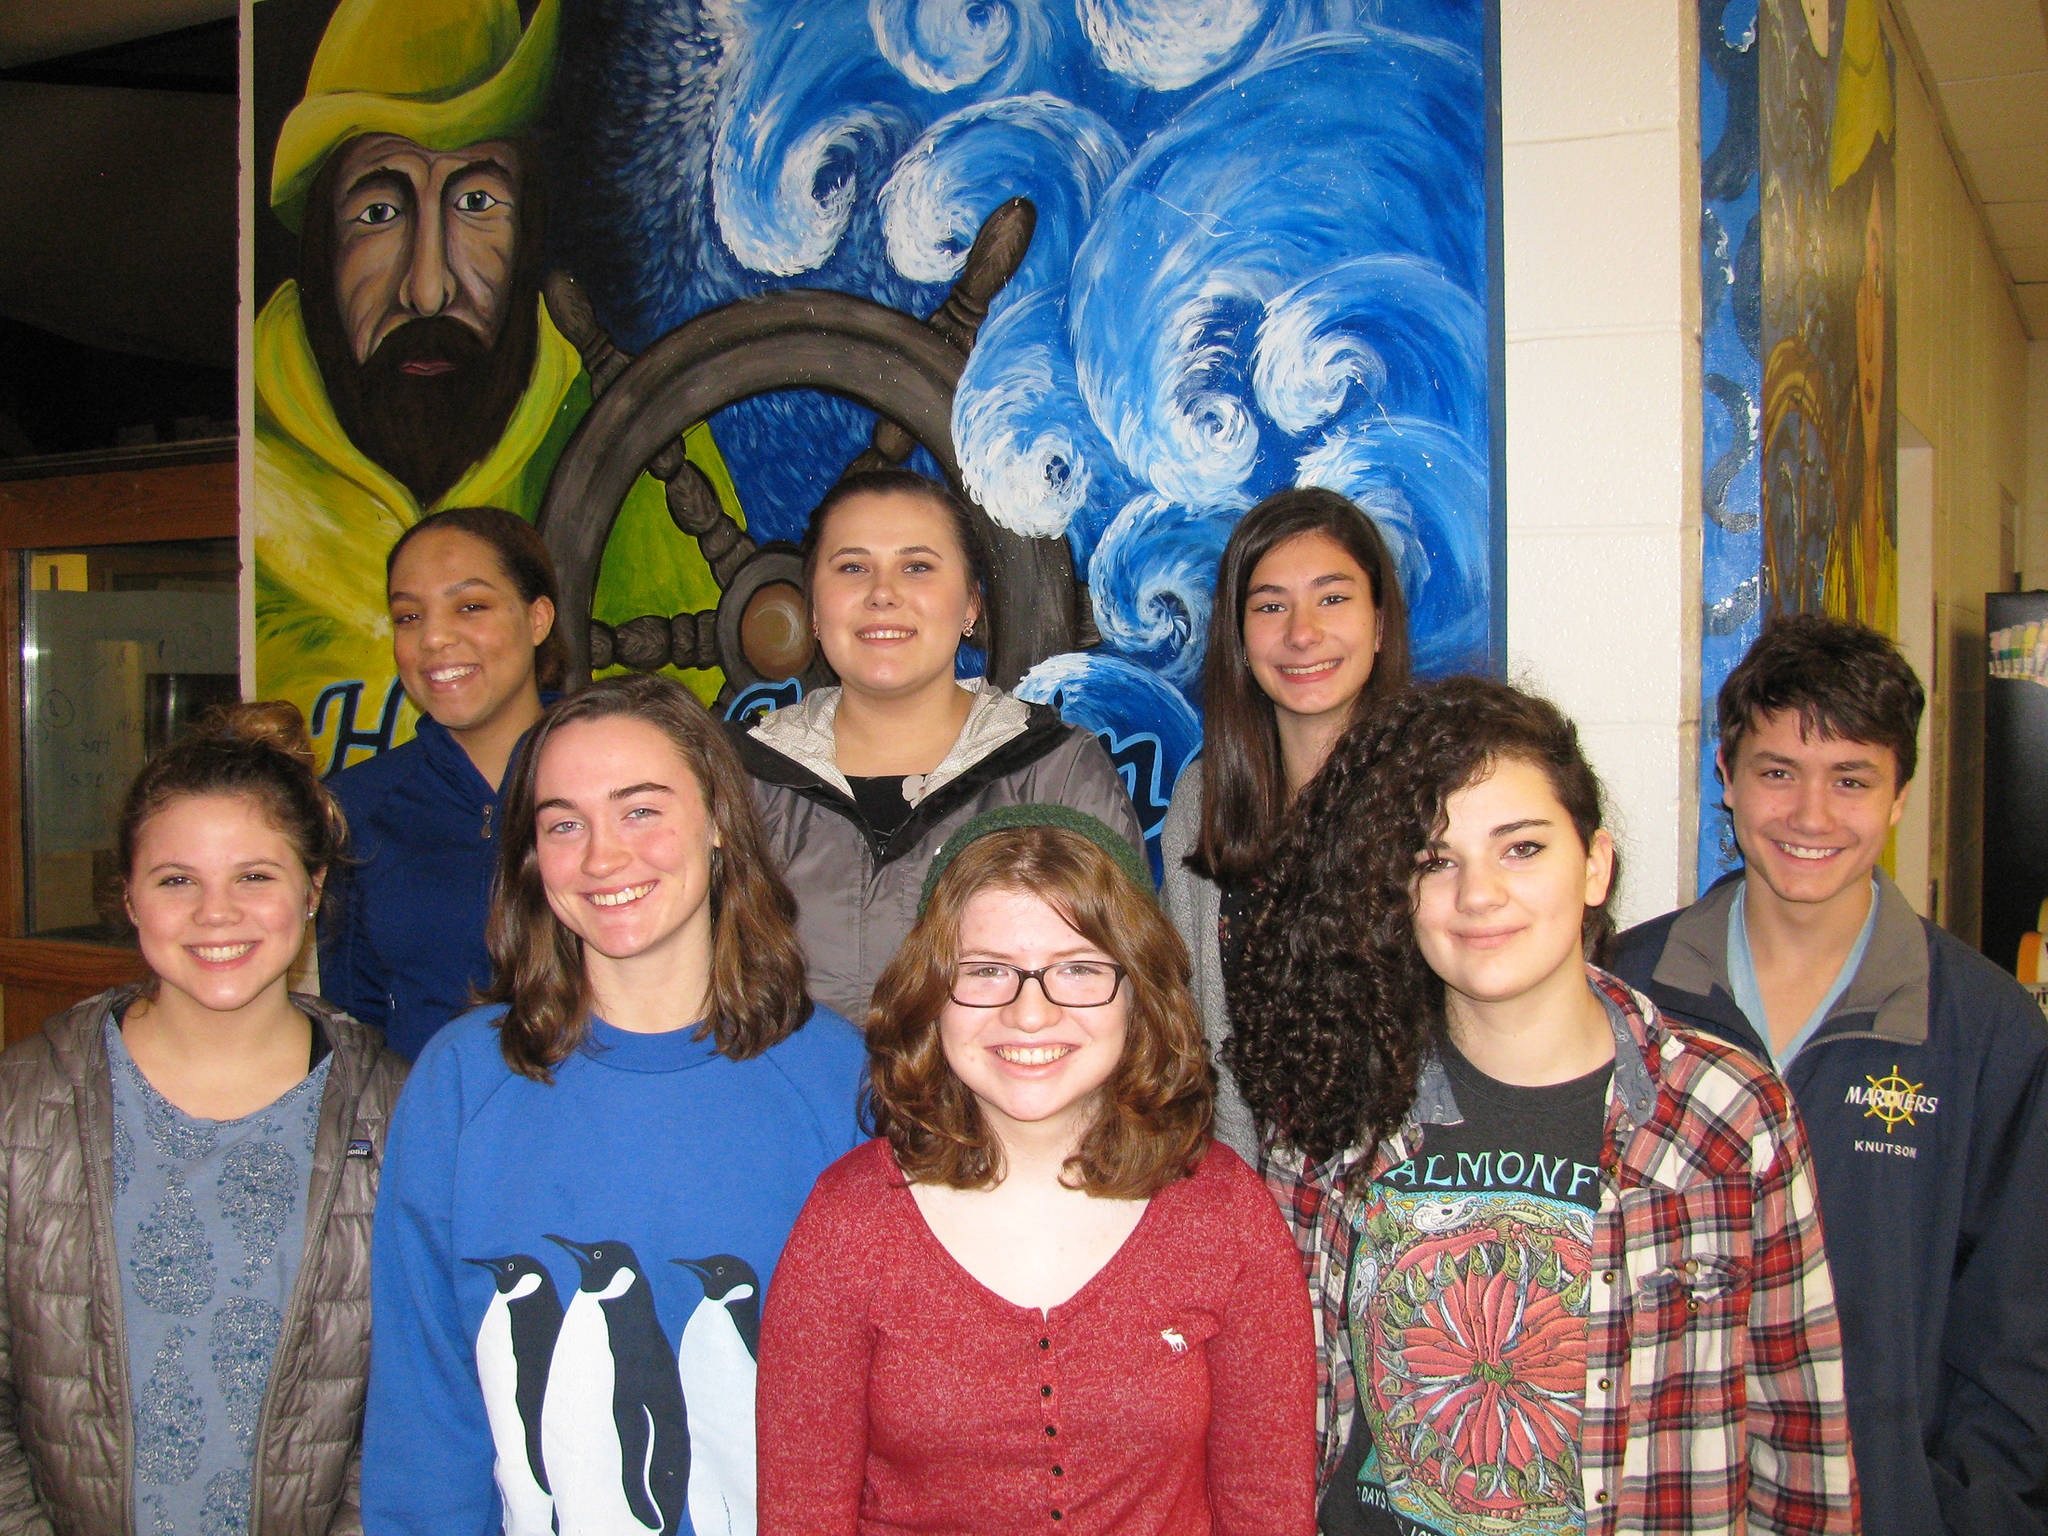 Homer High School students pose in celebration of being named Mariners on the Move for this quarter. Back row from left to right: Alia Bales, Ksenia Kuzmin, Kara Super and Bergen Knutson. Front row from left to right: Rylee Doughty, Ali McCarron, Alicia Bianchi and Emma Sulczynski. (Photo courtesy Paul Story)